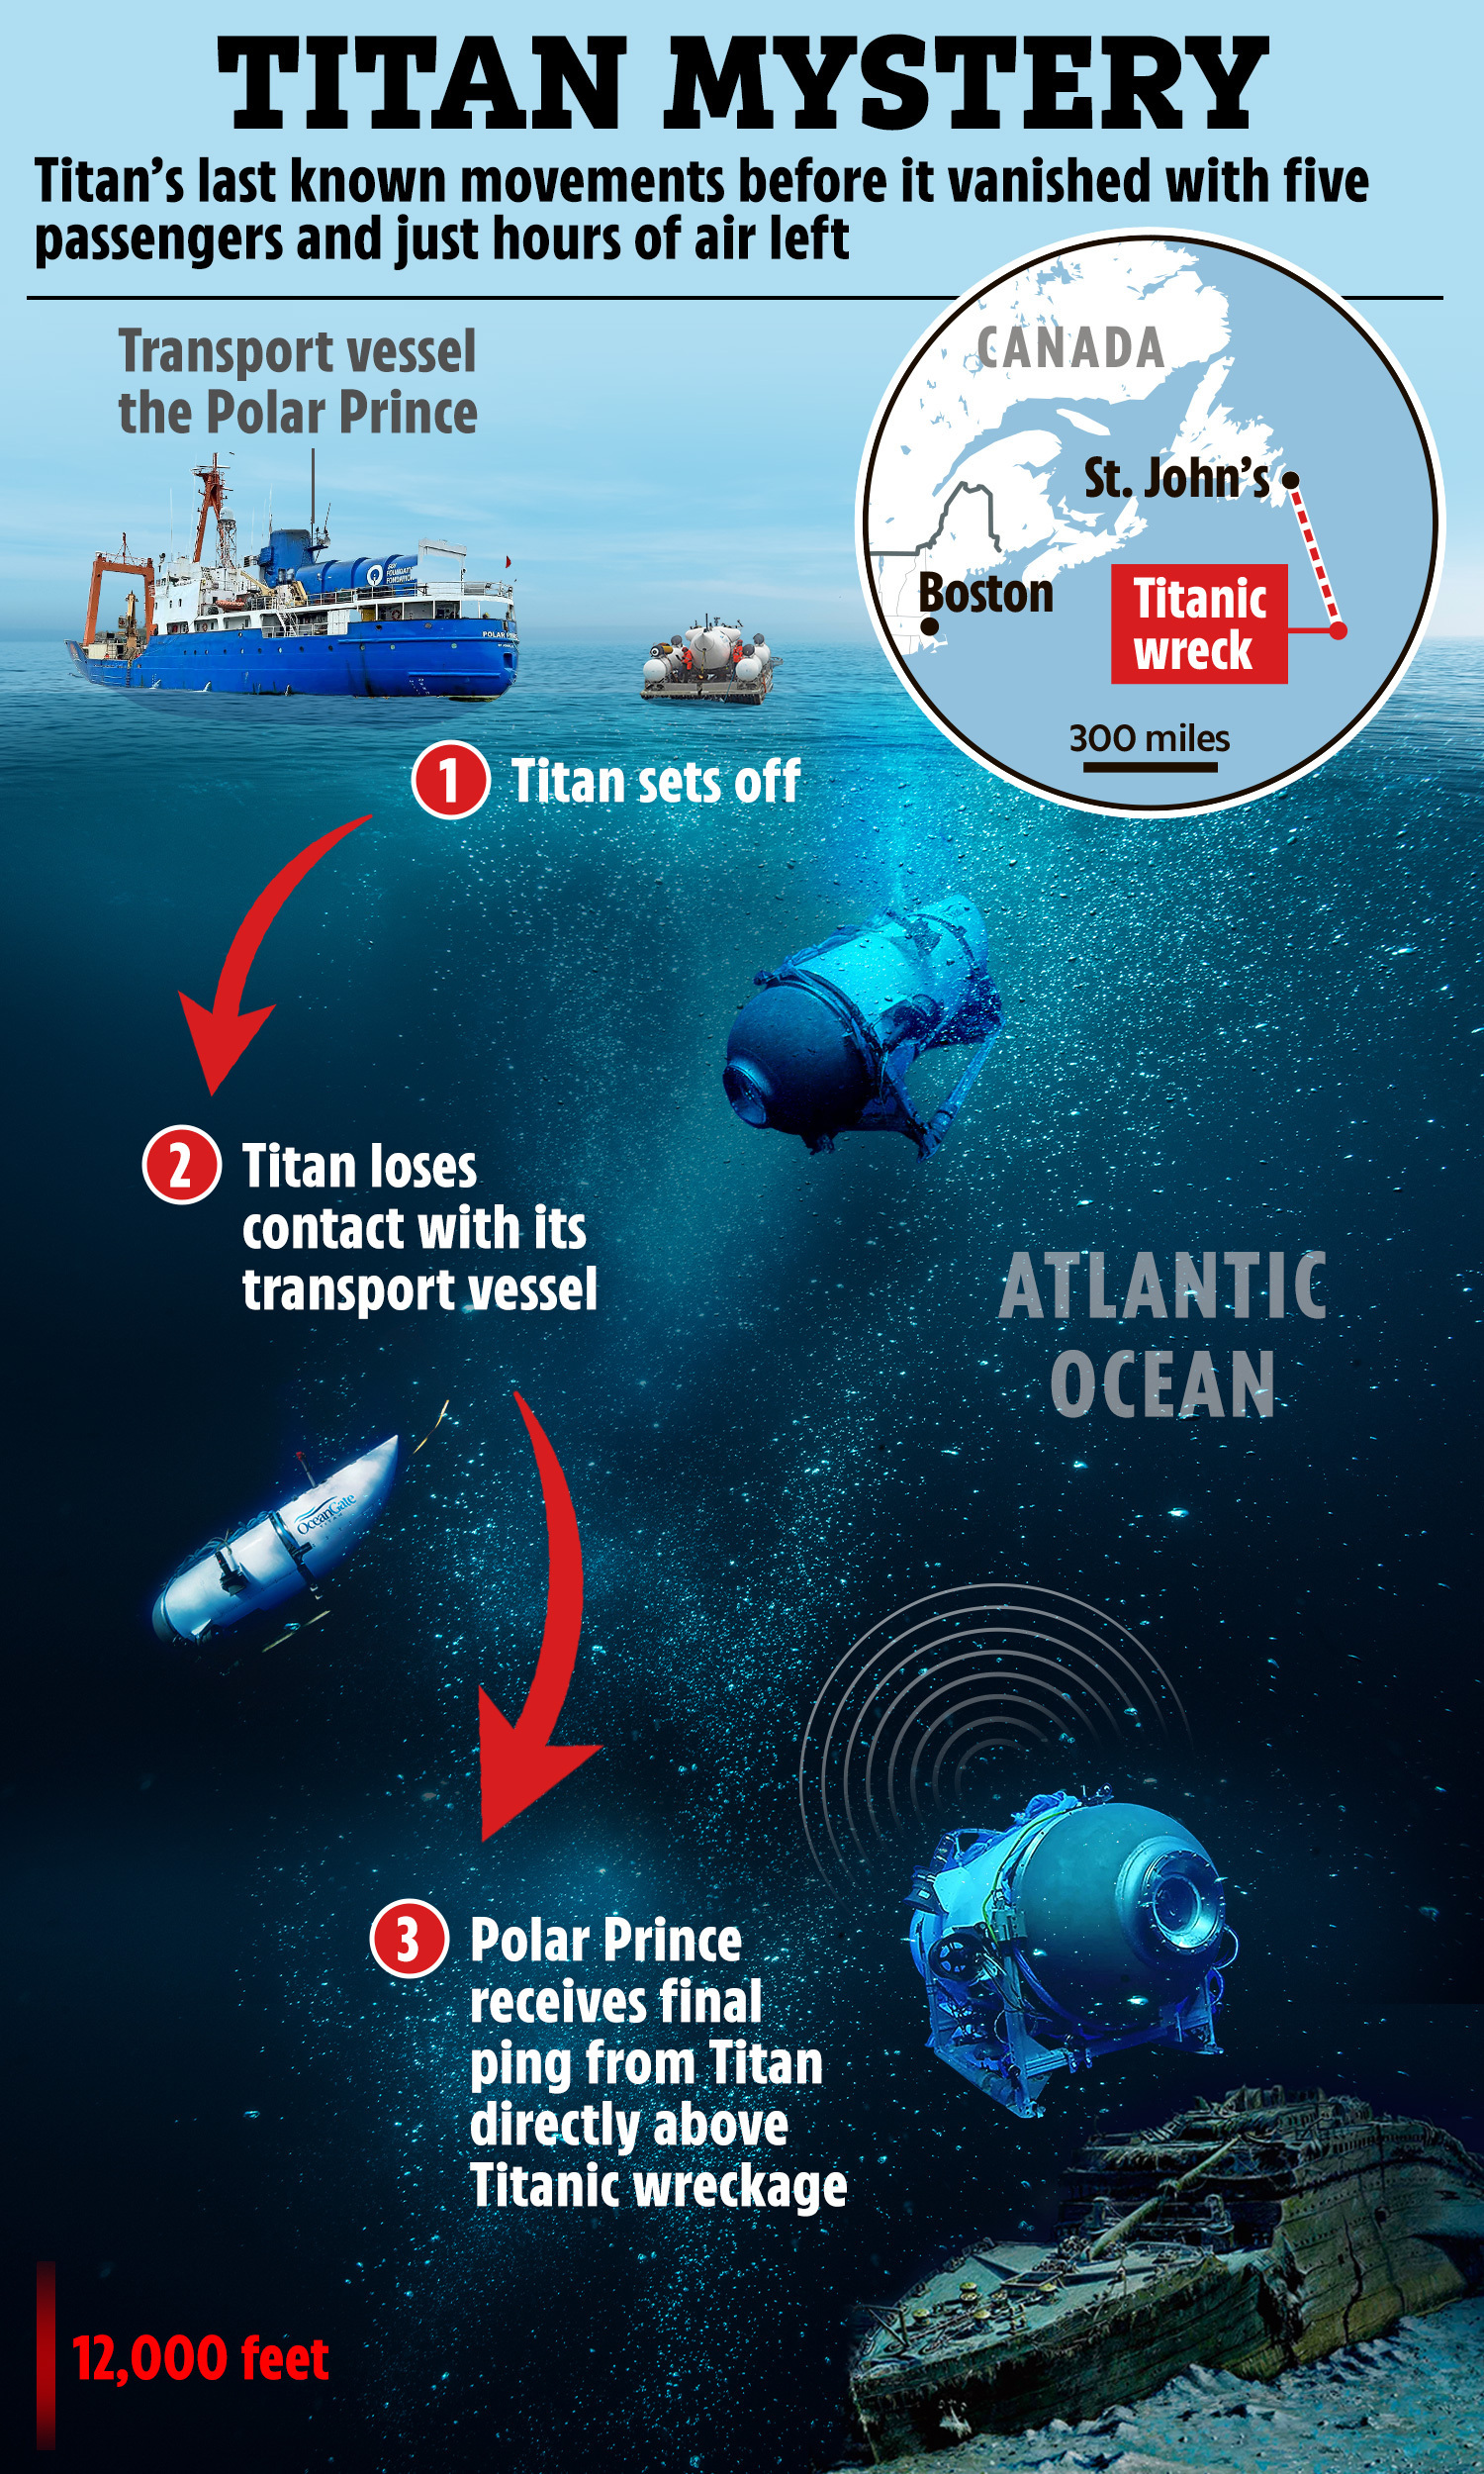 Polar Prince received its final ping from the submarine known as Titan right above the Titanic wreckage at 3pm on Monday